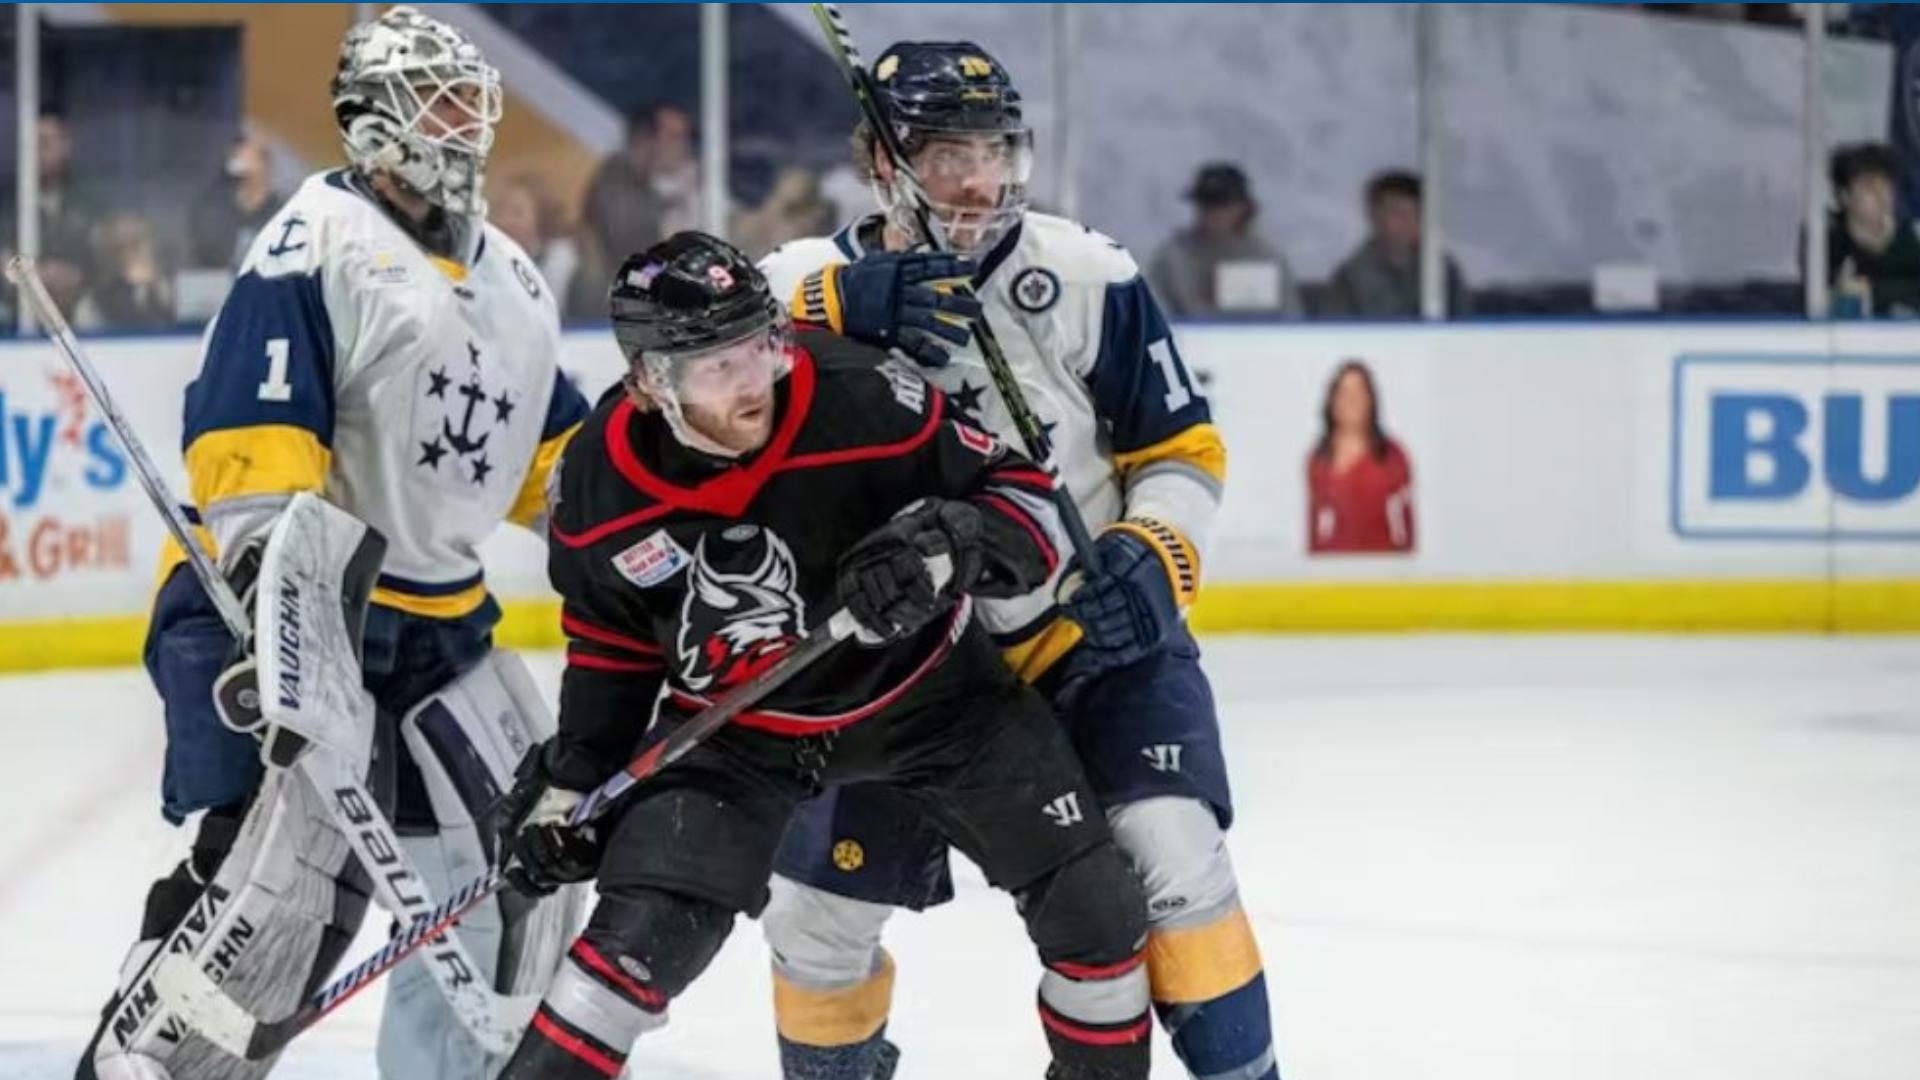 Despite Adirondack's five shots, the Admirals outshot them with nine shots in the opening 20 minutes, and the game remained scoreless.